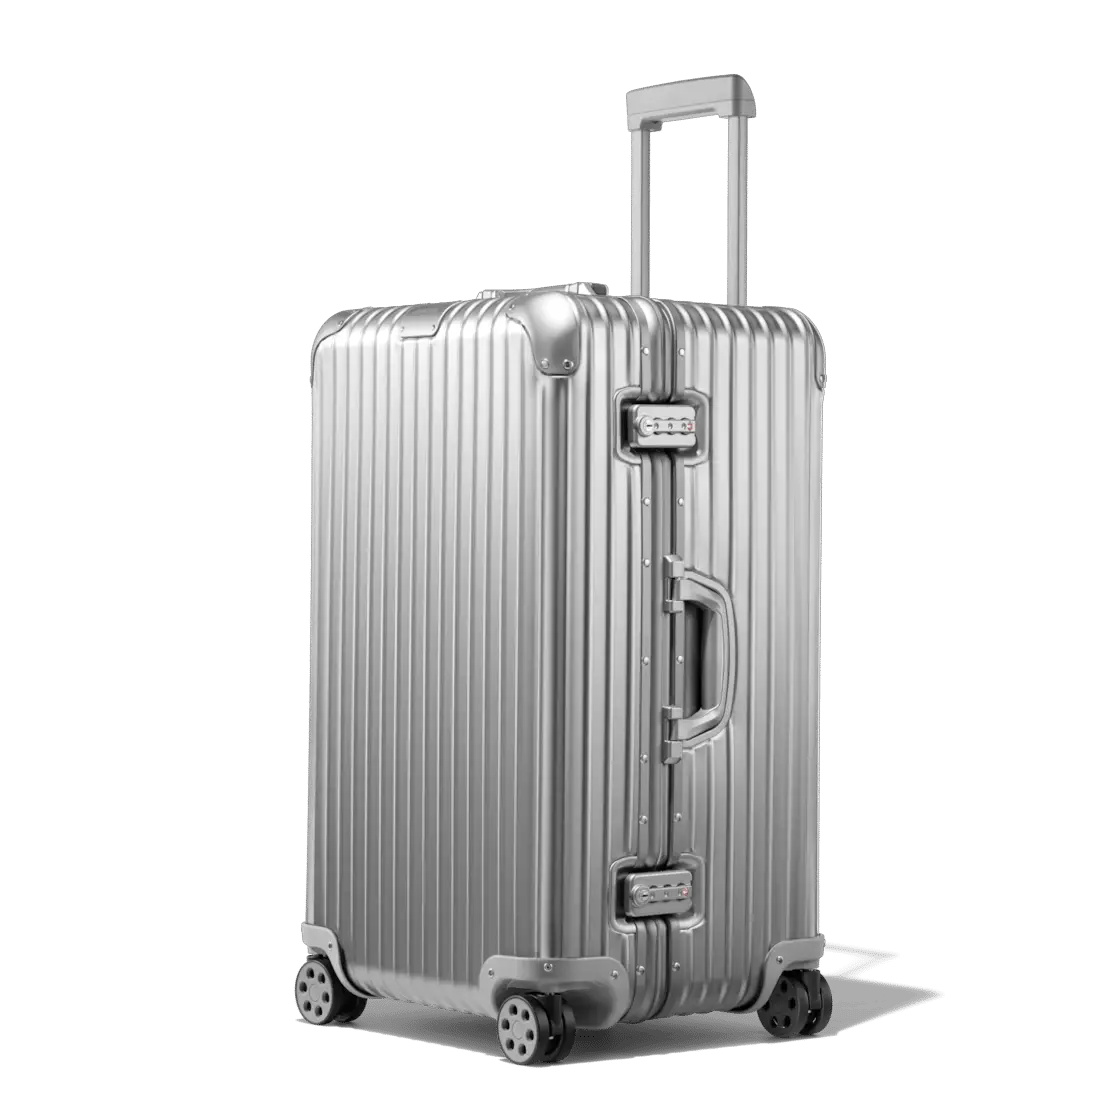 The Rimowa Trunk S: A Closer Look at This Wardrobe Classic